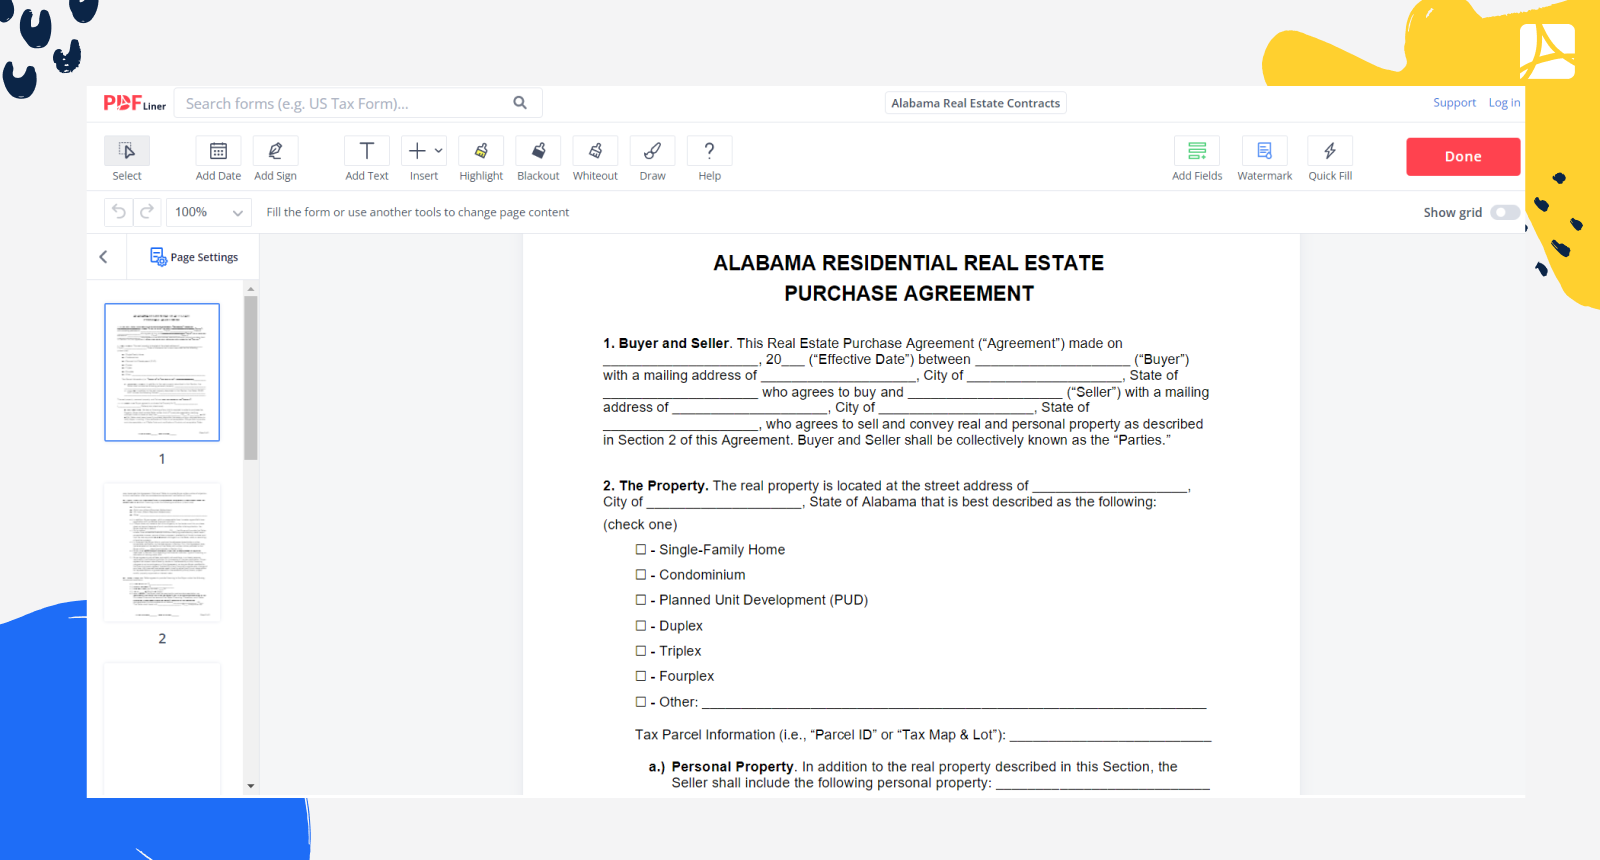 Alabama Real Estate Contracts Form Screenshot